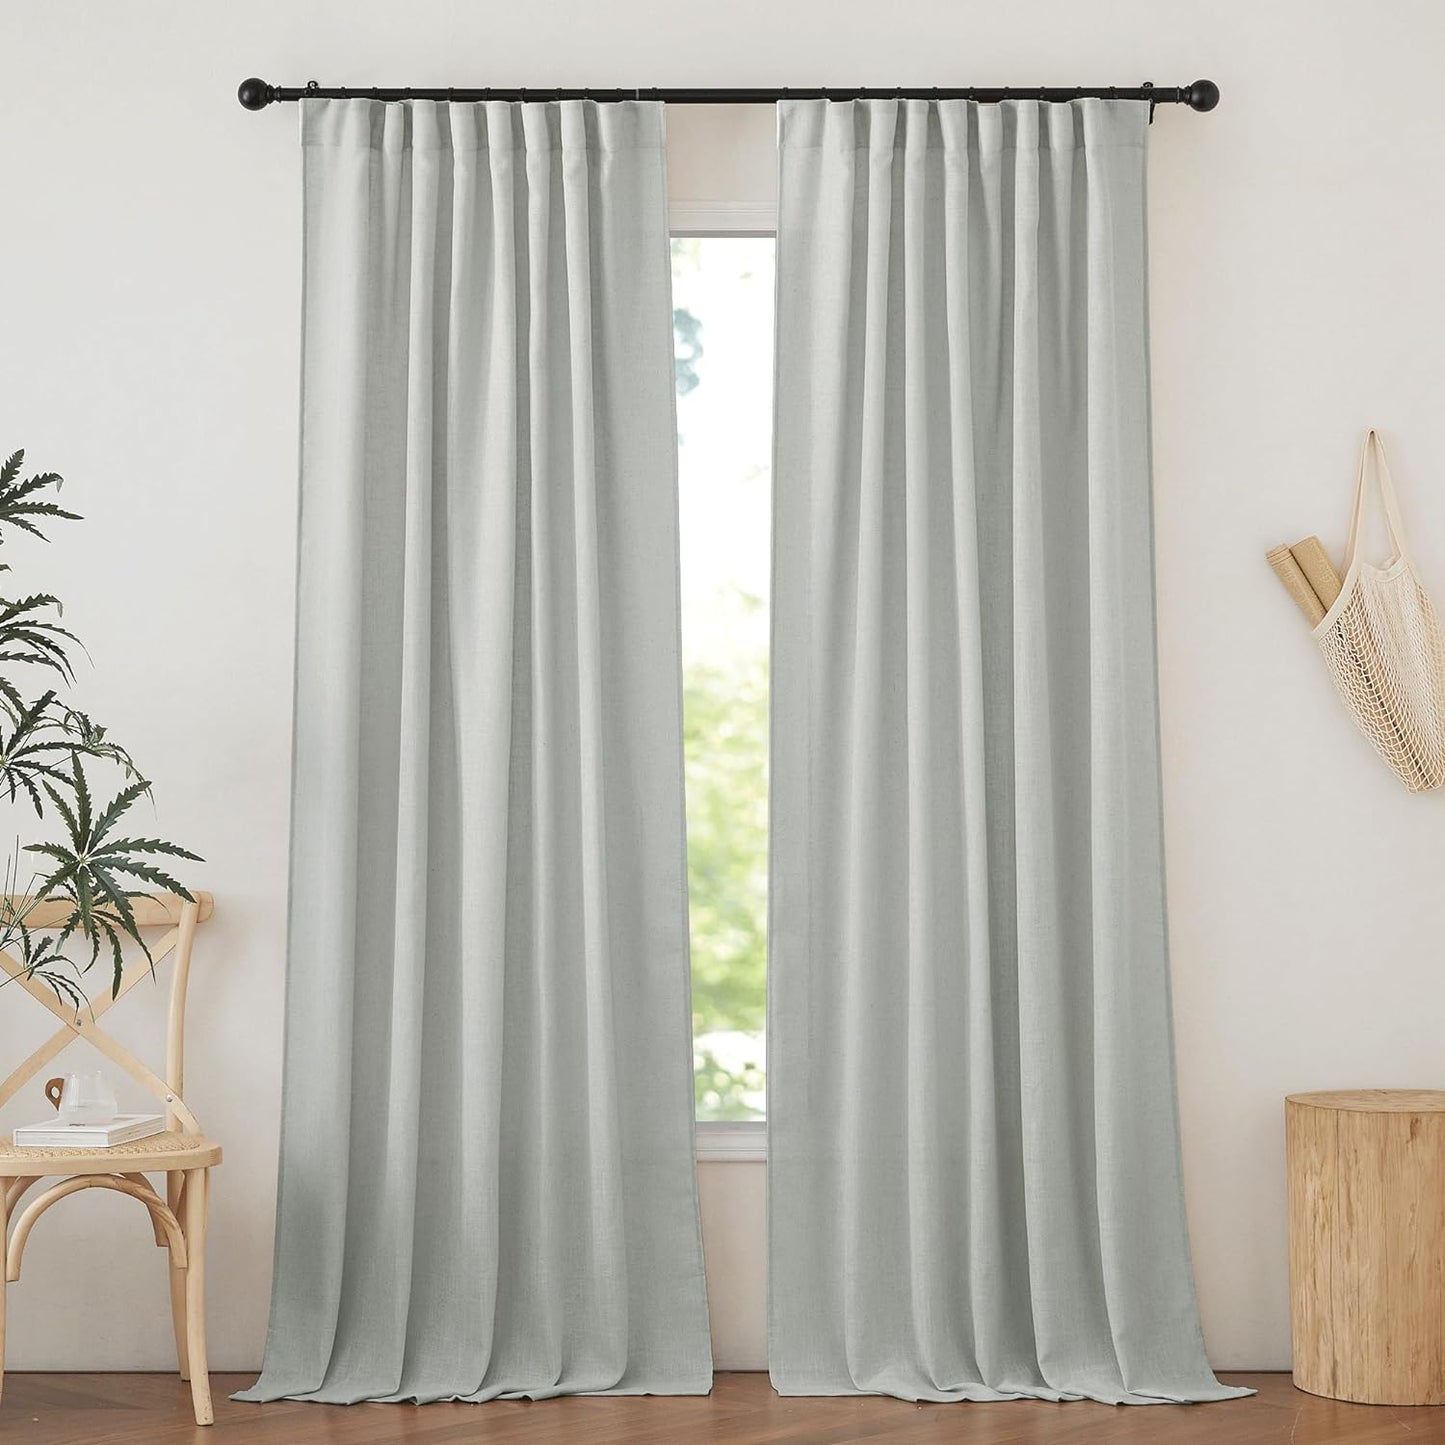 NICETOWN Linen Textured Curtain for Bedroom/Living Room Thermal Insulated Back Tab Linen Look Curtain Drapes Soft Rich Material Light Reducing Drape Panels for Window, 2 Panels, 52 X 84 Inch, Linen  NICETOWN Dark Grey W52 X L84 